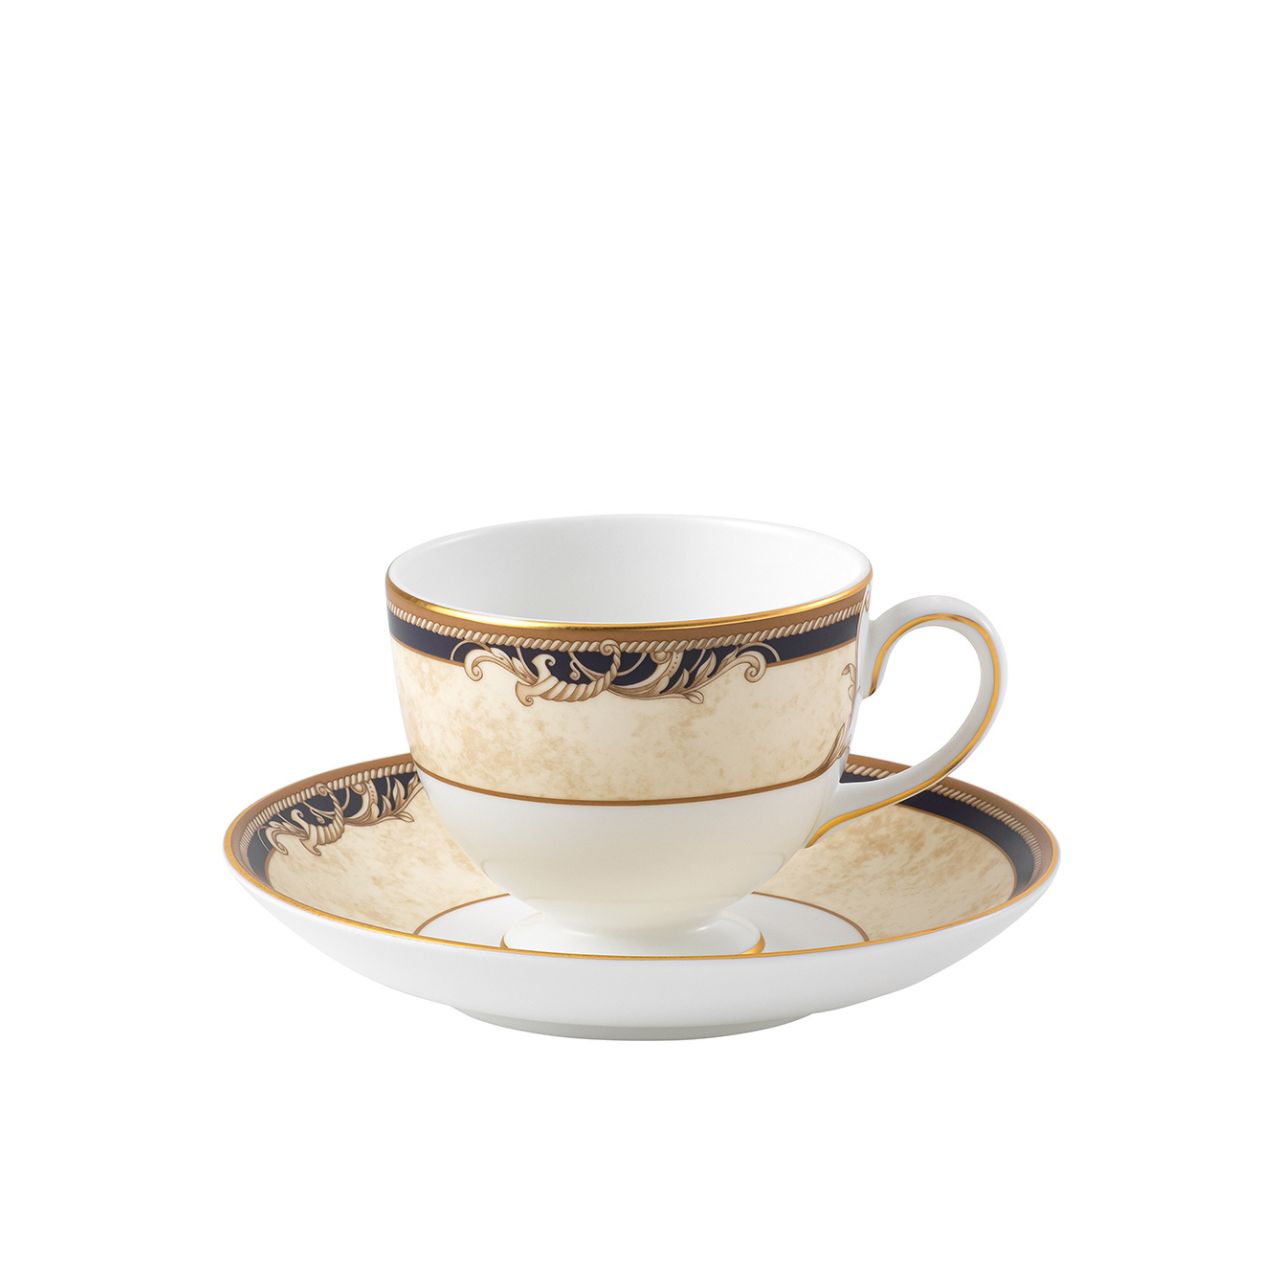 Wedgwood Cornucopia Tea Saucer 15cm  Wedgwood Cornucopia is inspired by the mythical 'Horn of Plenty,' and is characterized by designs featuring legendary creatures like unicorns and satyrs.